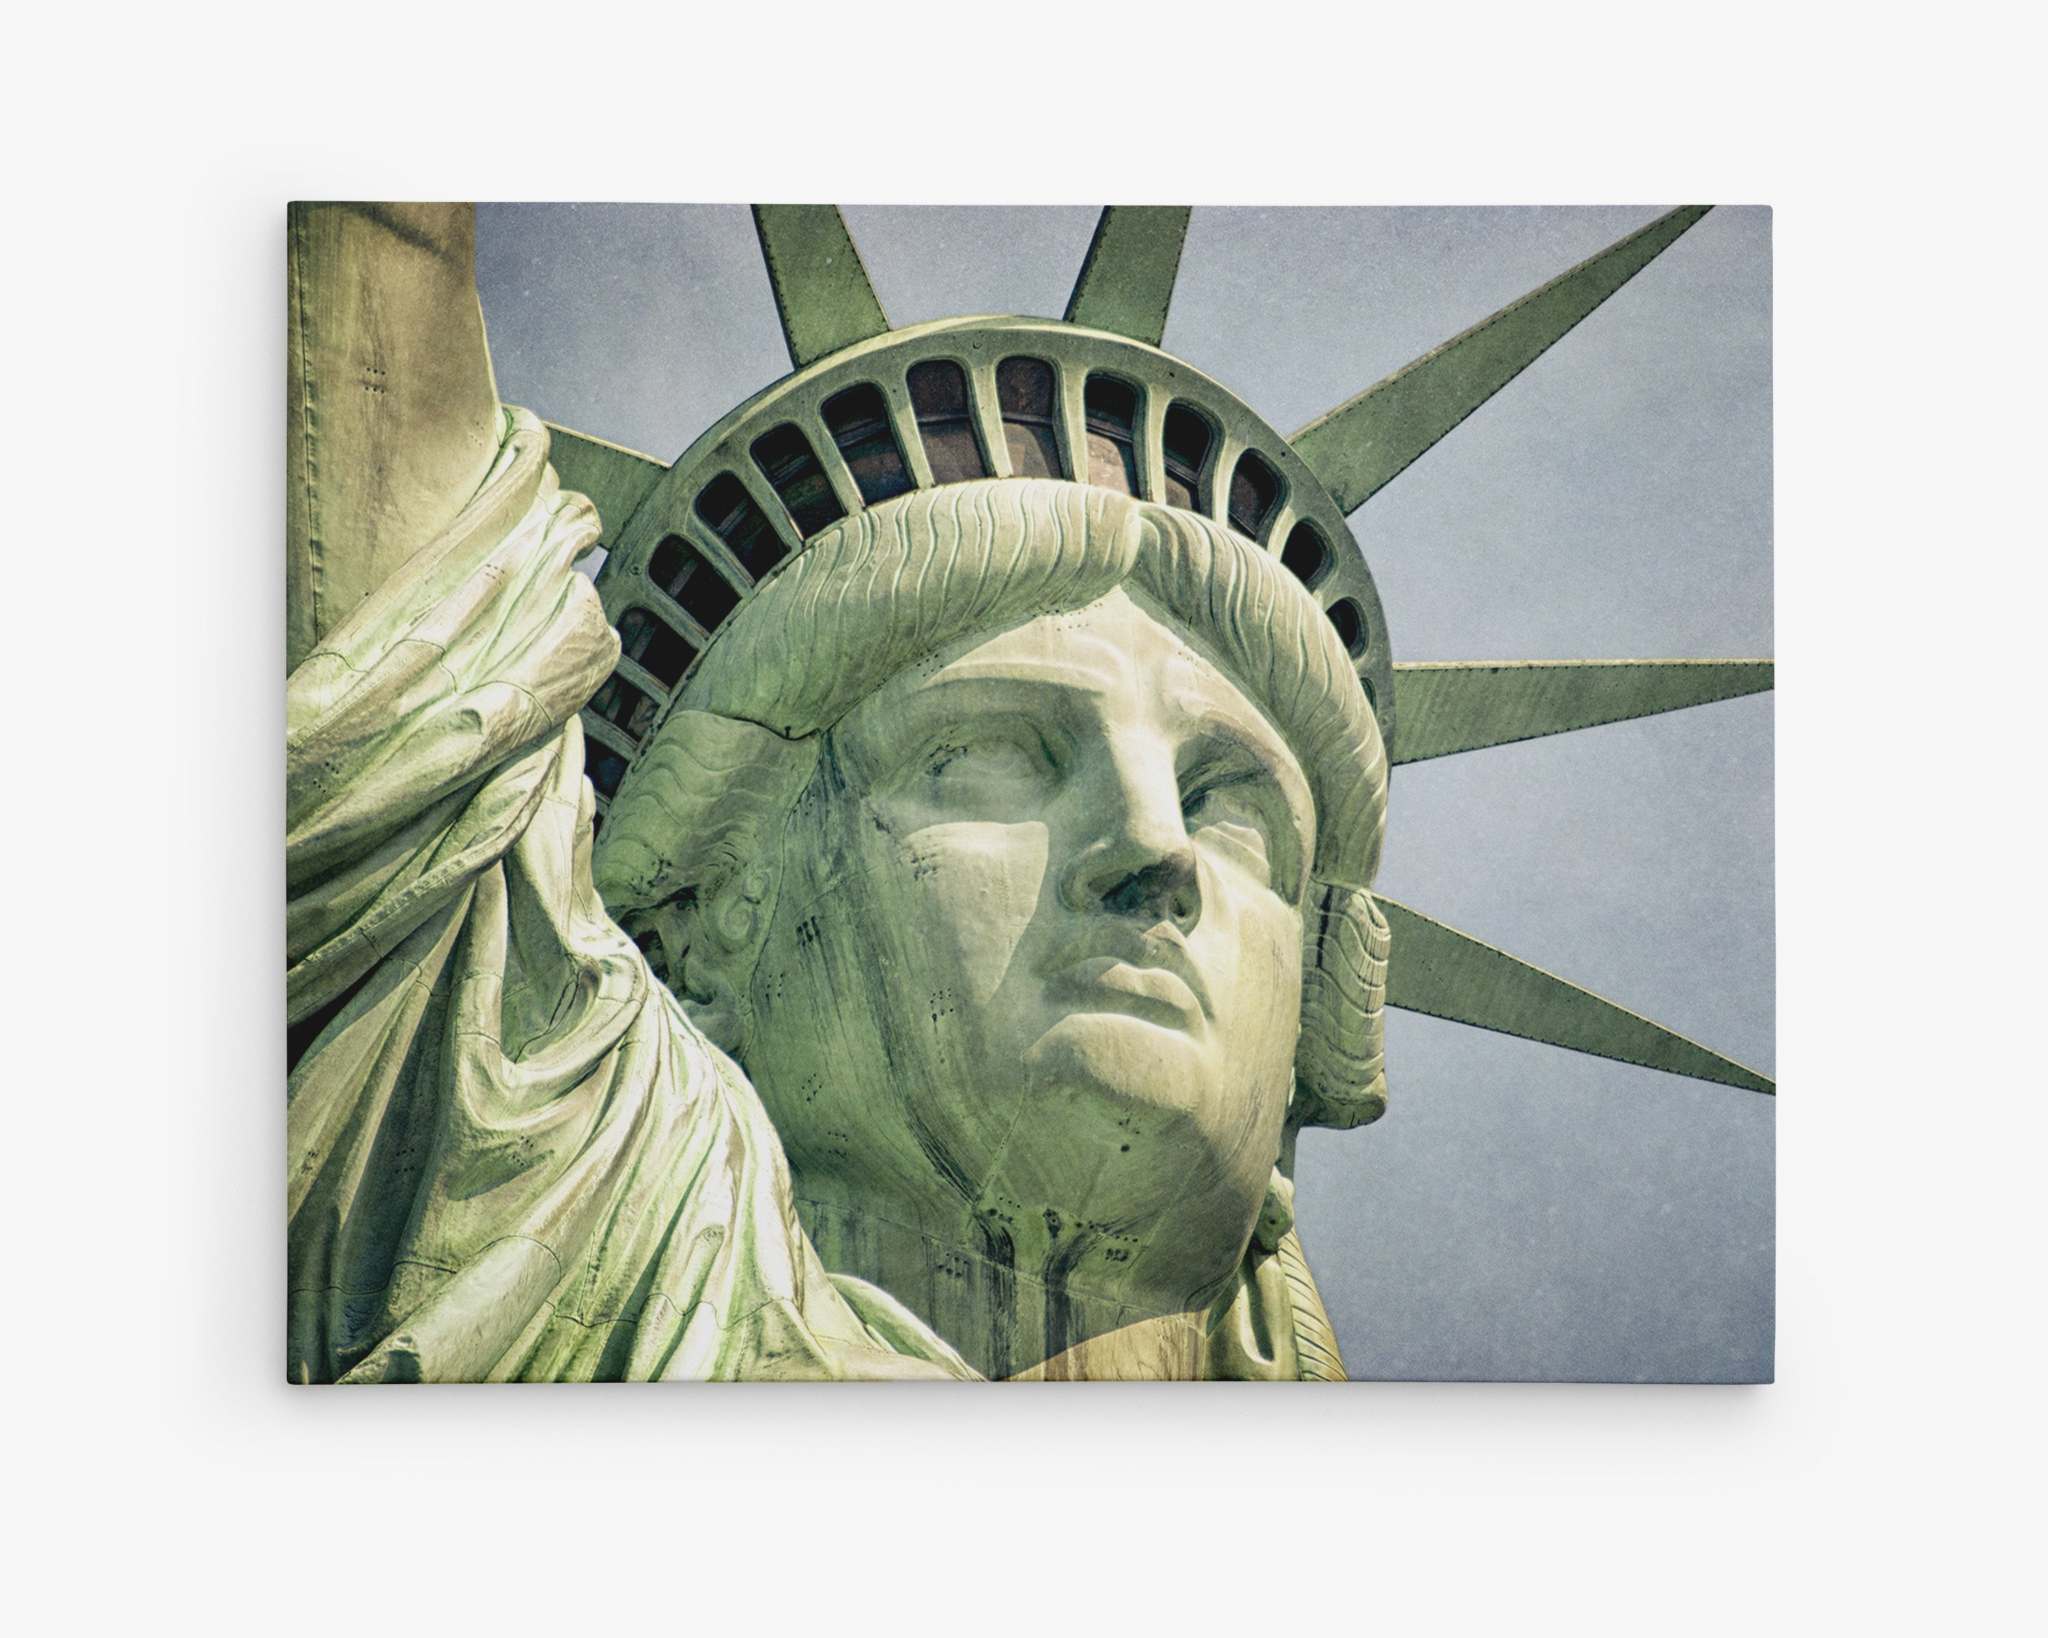 Close-up image of the Statue of Liberty's face and crown, printed on premium artist-grade canvas. The photograph captures the statue's stern expression and the seven rays of the crown against a pale blue sky. The green oxidized copper surface shows detailed texture and historical weathering. This is New York City Canvas Wall Art, 'Face of Liberty' by Offley Green.